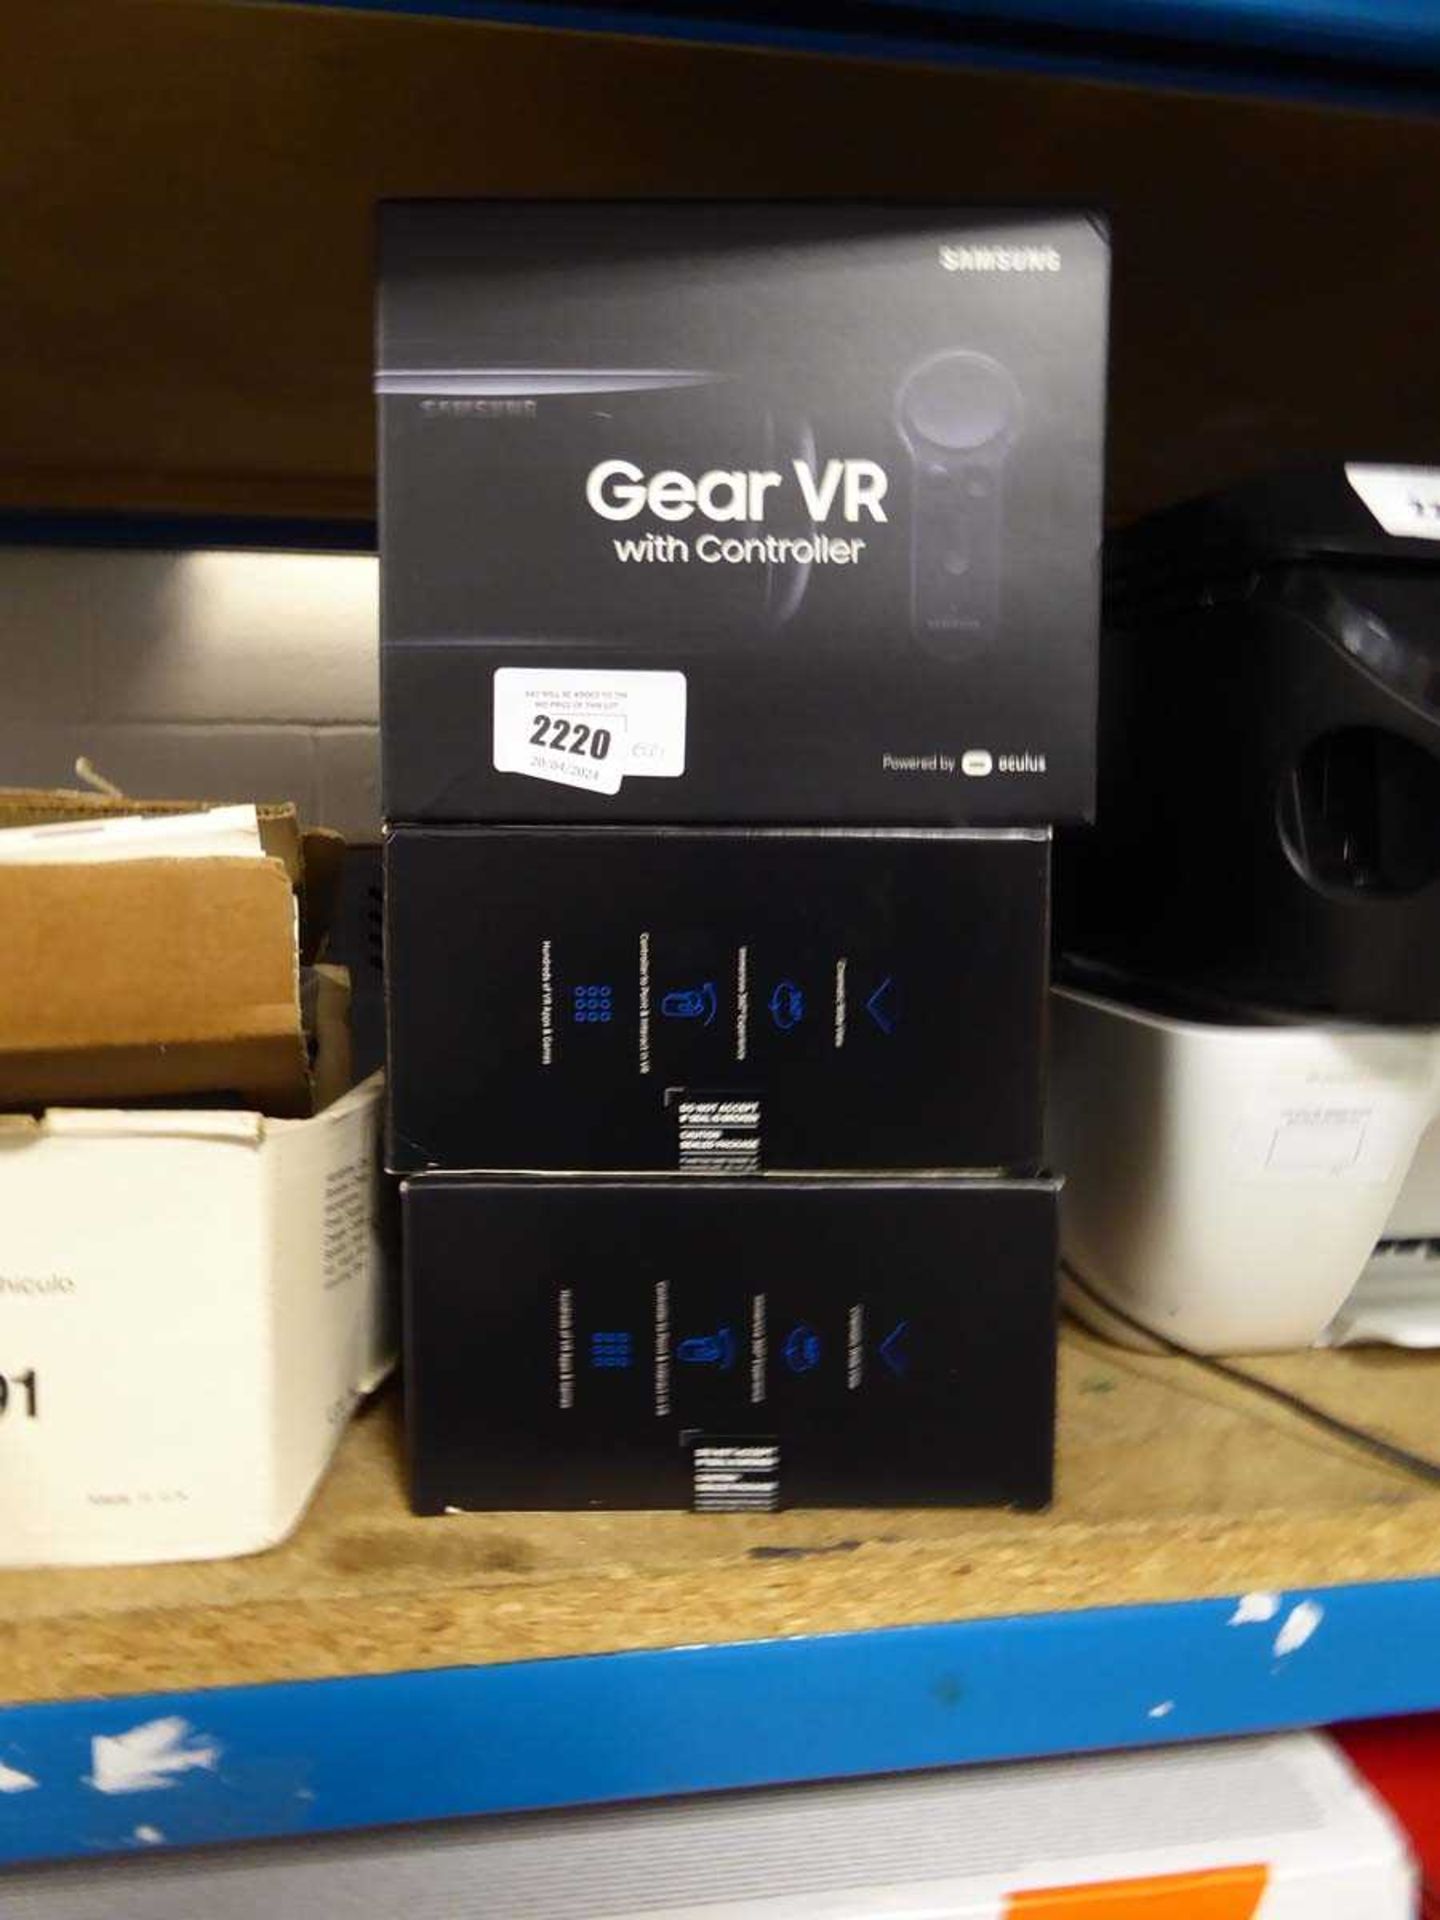 +VAT 3 Samsung GearVR headsets and controllers